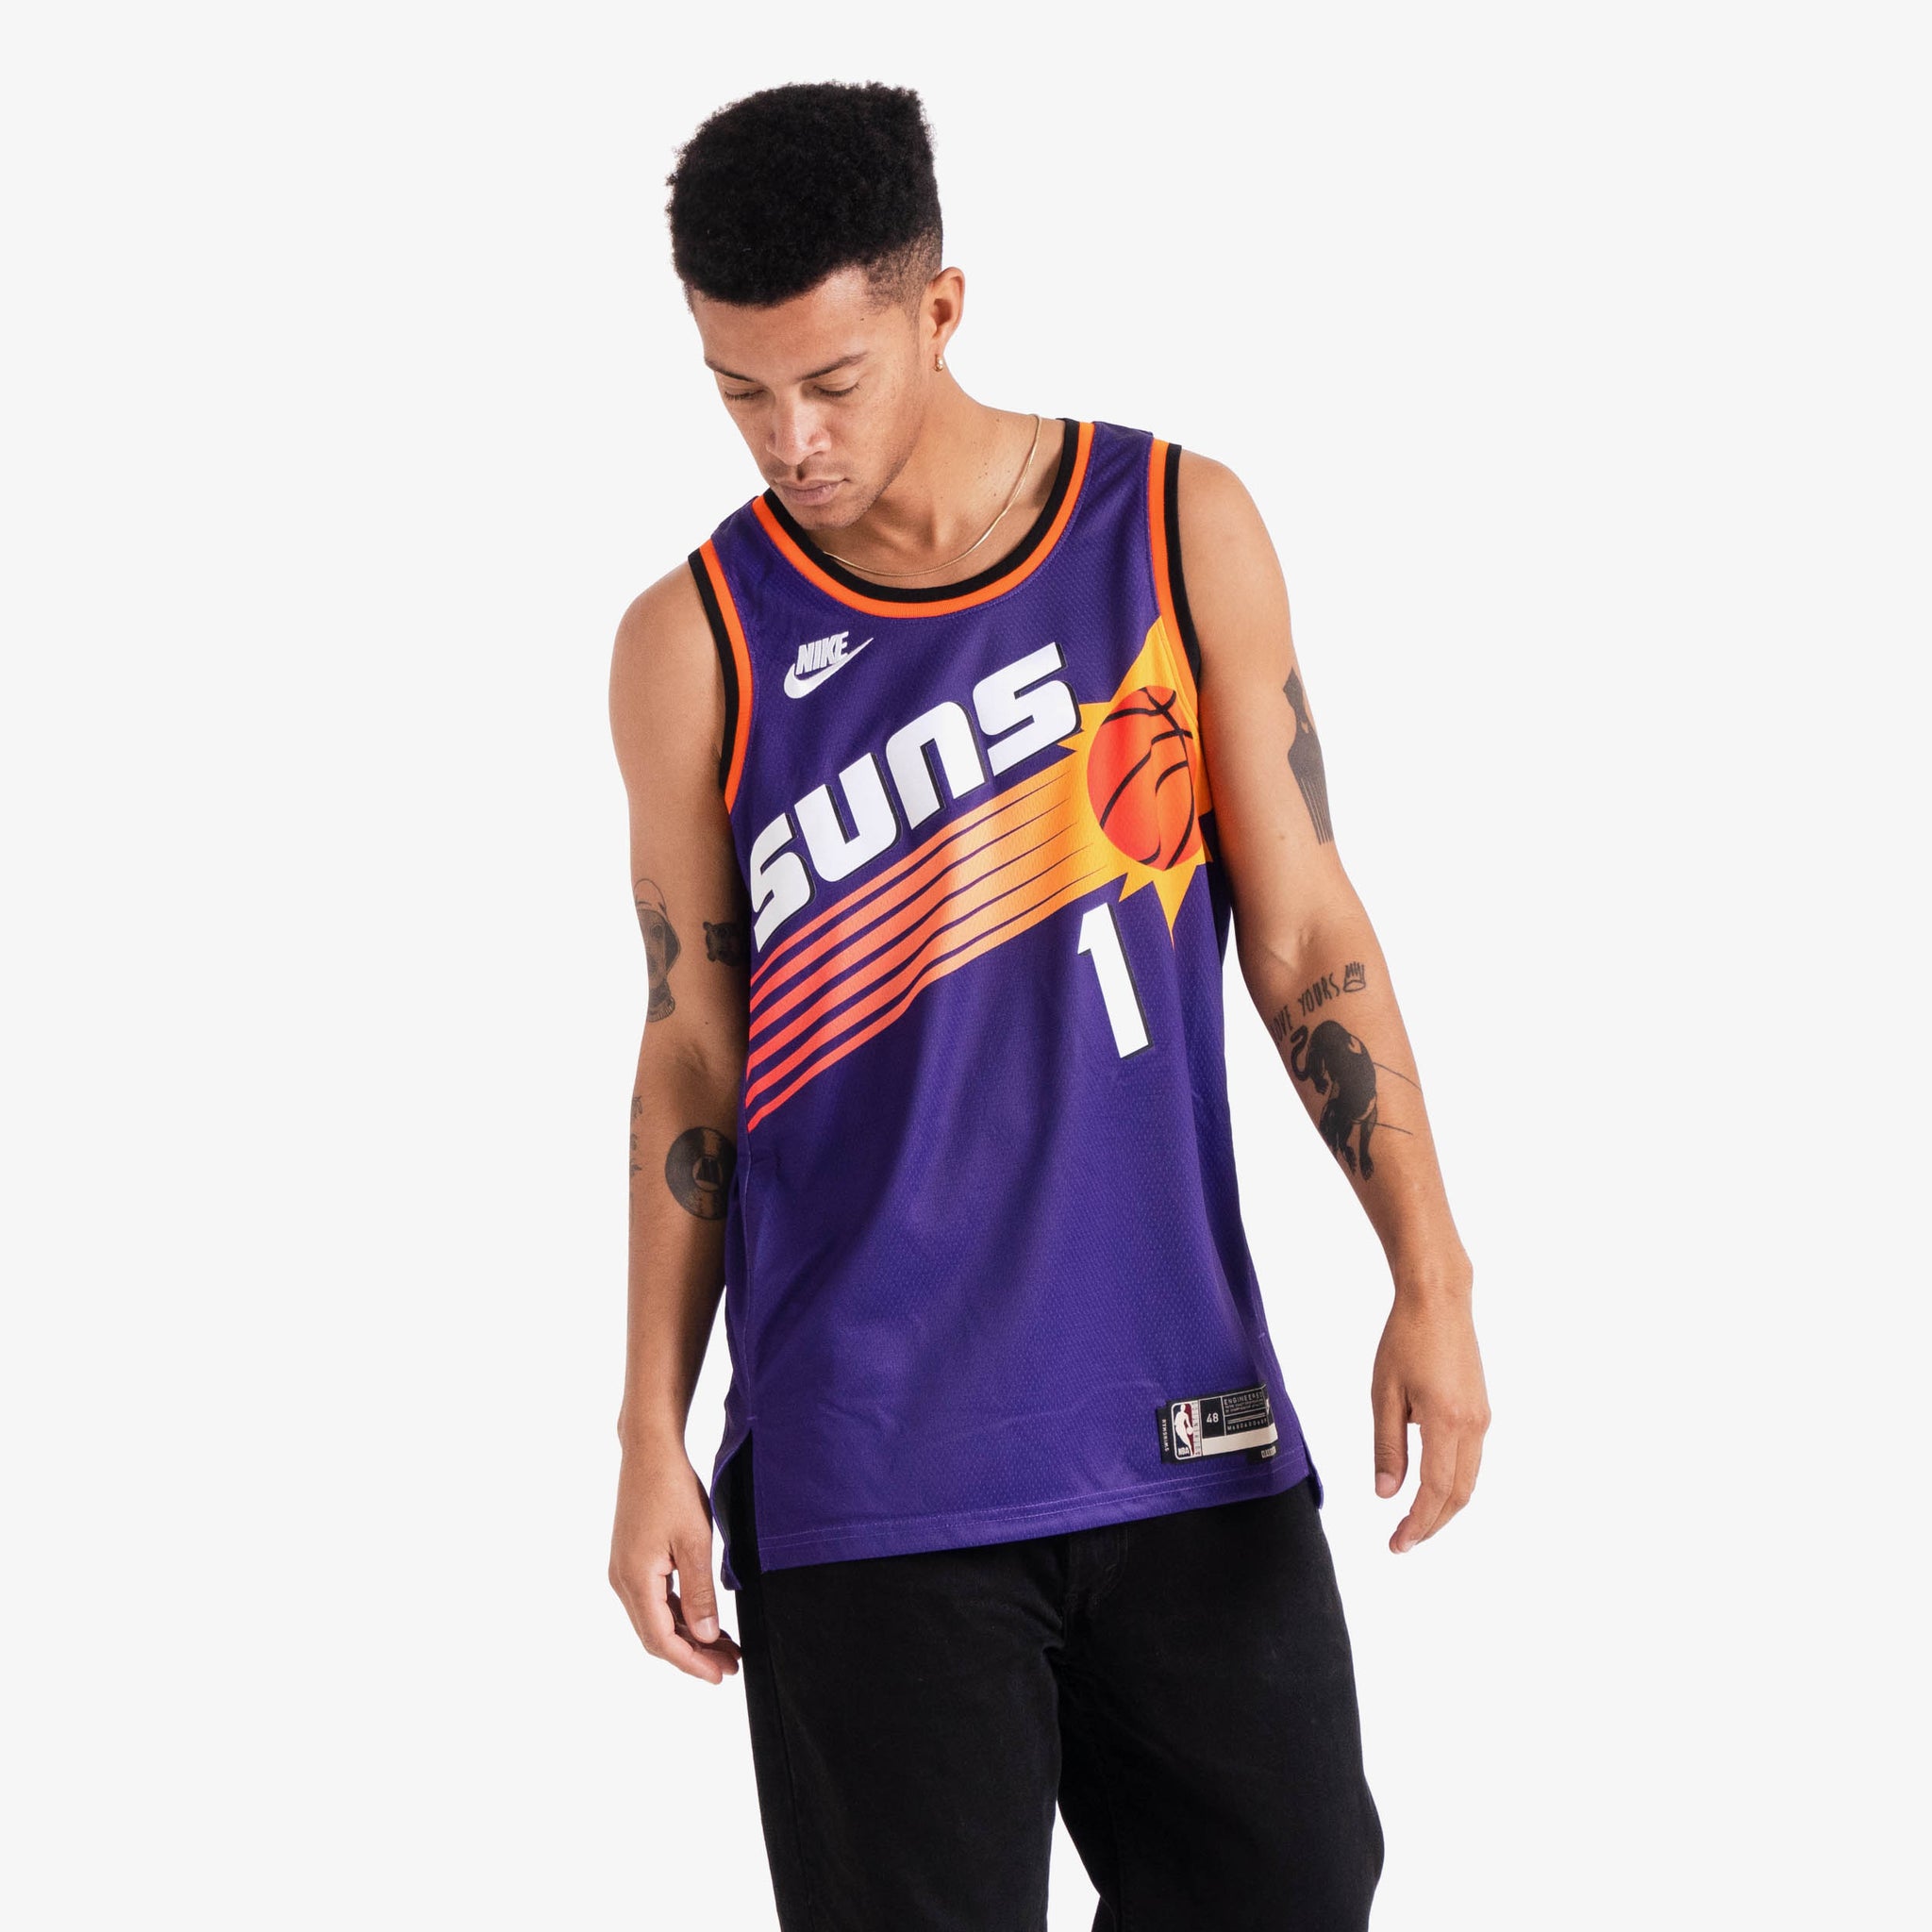 devin booker jersey mitchell and ness